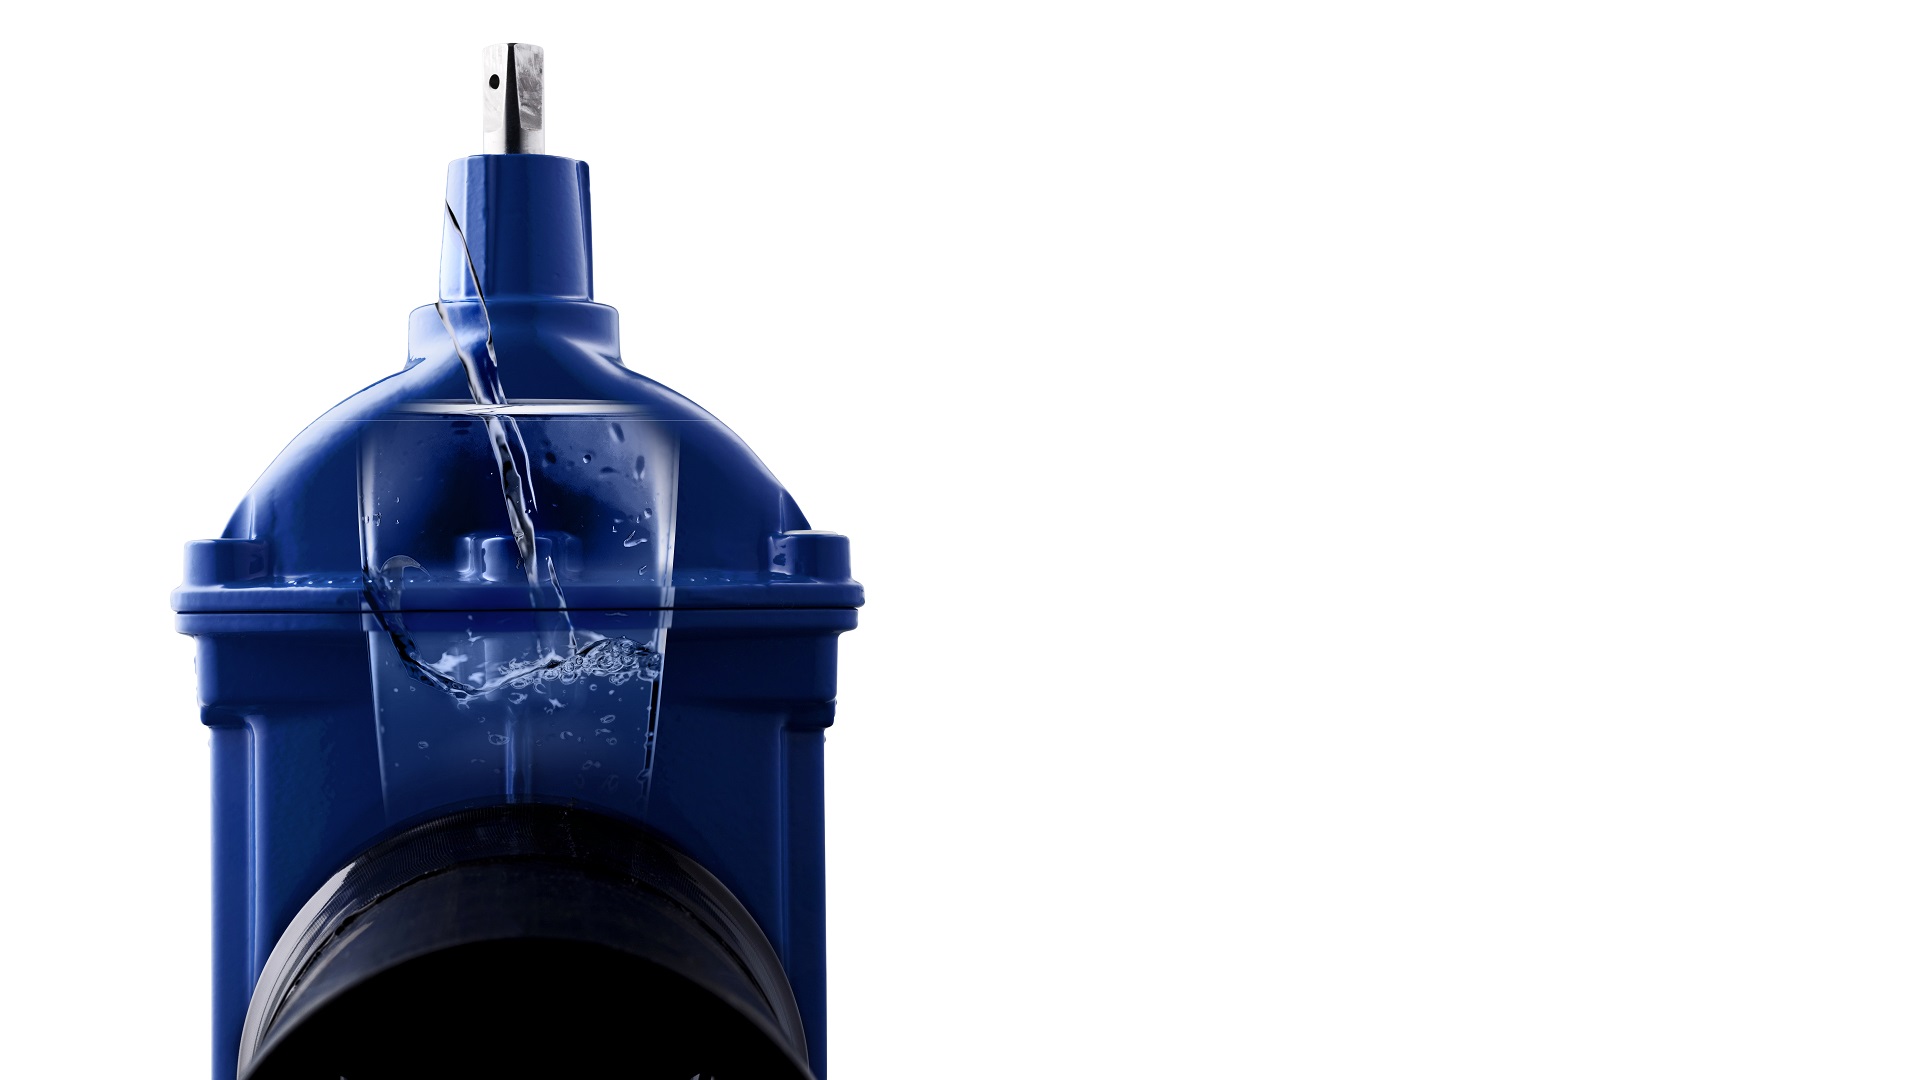 AVK gate valves in sustainable water infrastructure